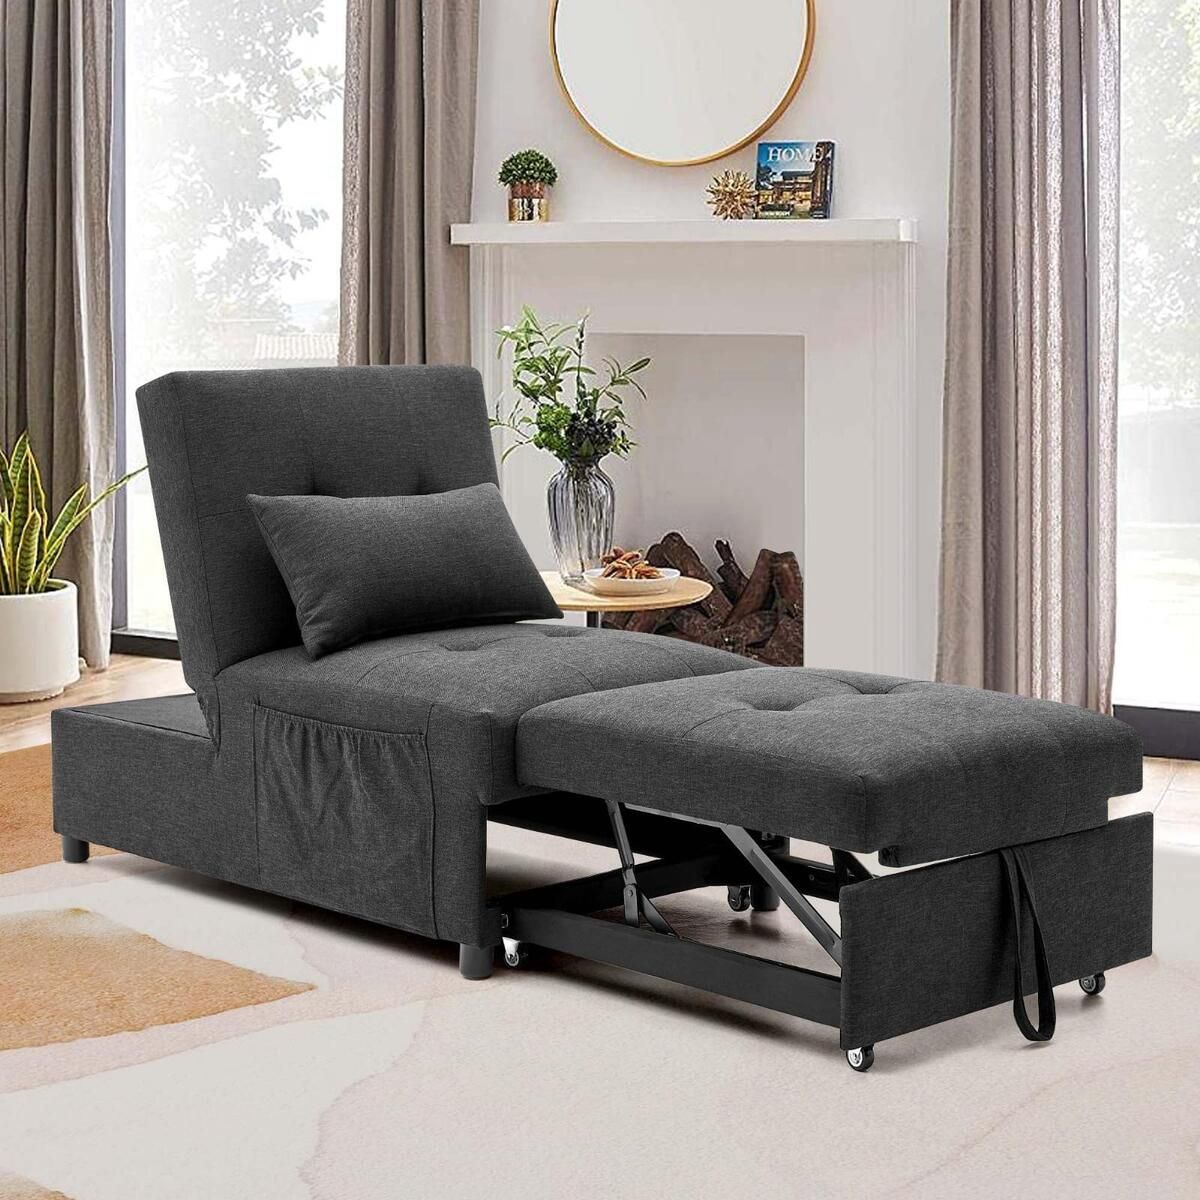 Convertible Sofa Chair Futon Bed 4 In 1 Pull Out Sleeper Chaise Home  Furniture | Ebay With Regard To 4 In 1 Convertible Sleeper Chair Beds (View 3 of 15)